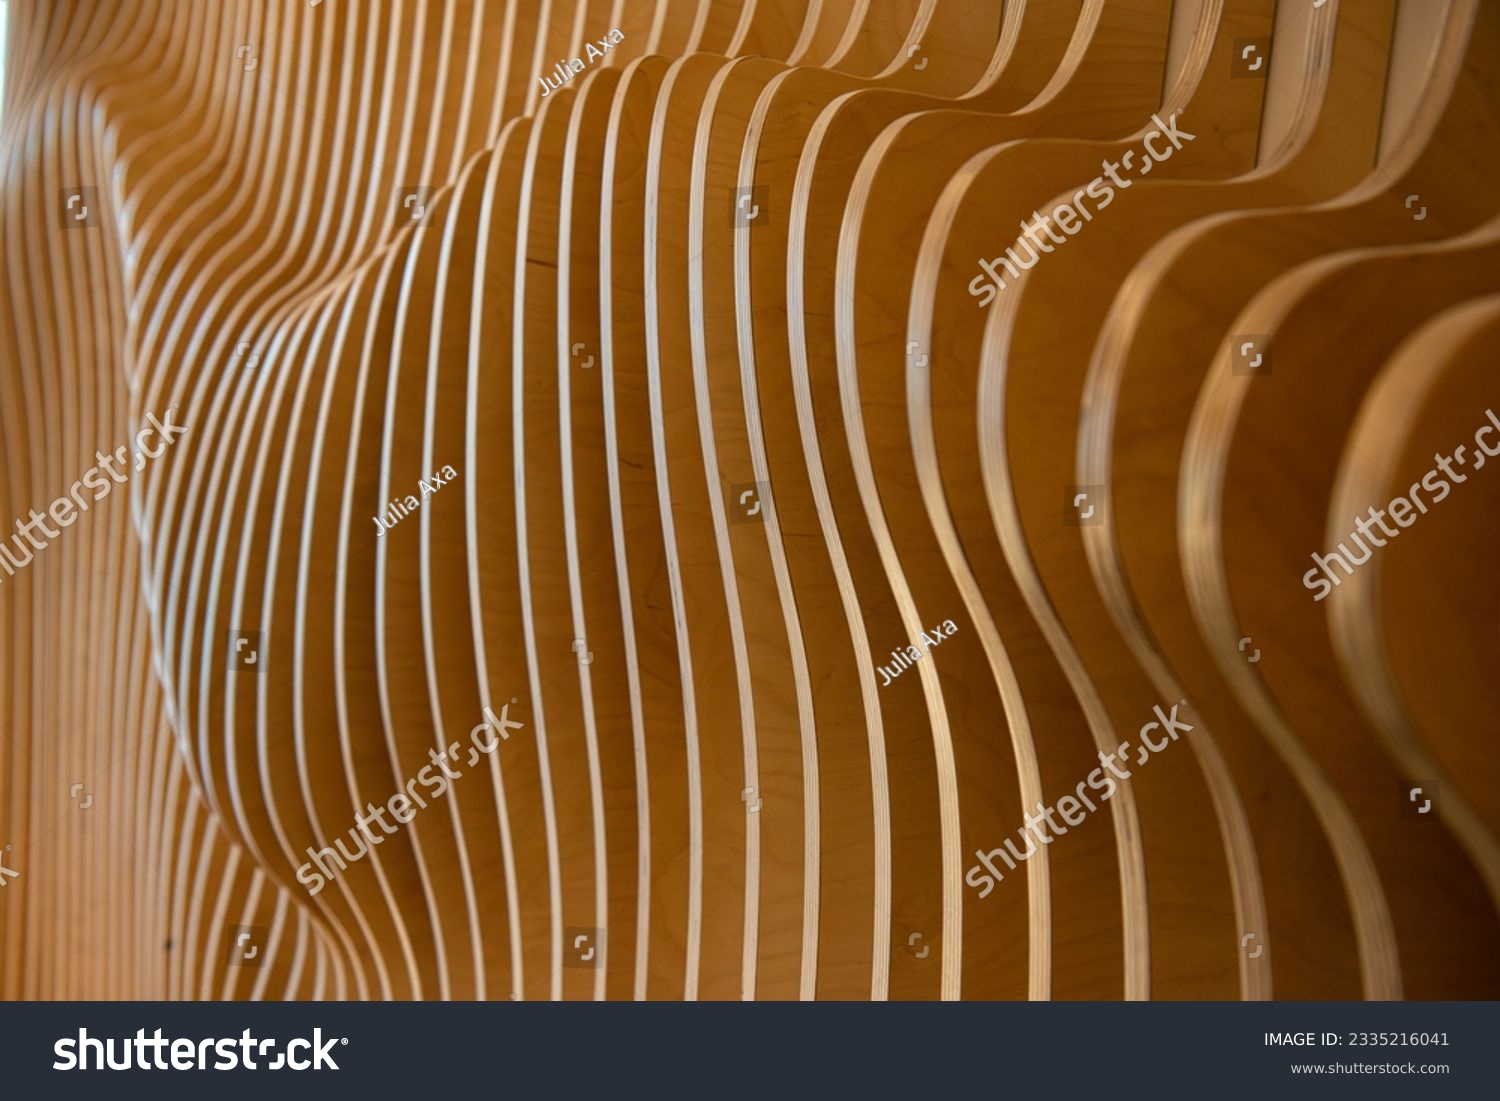 Wood surface texture. Abstract background. 3d effect. #2335216041